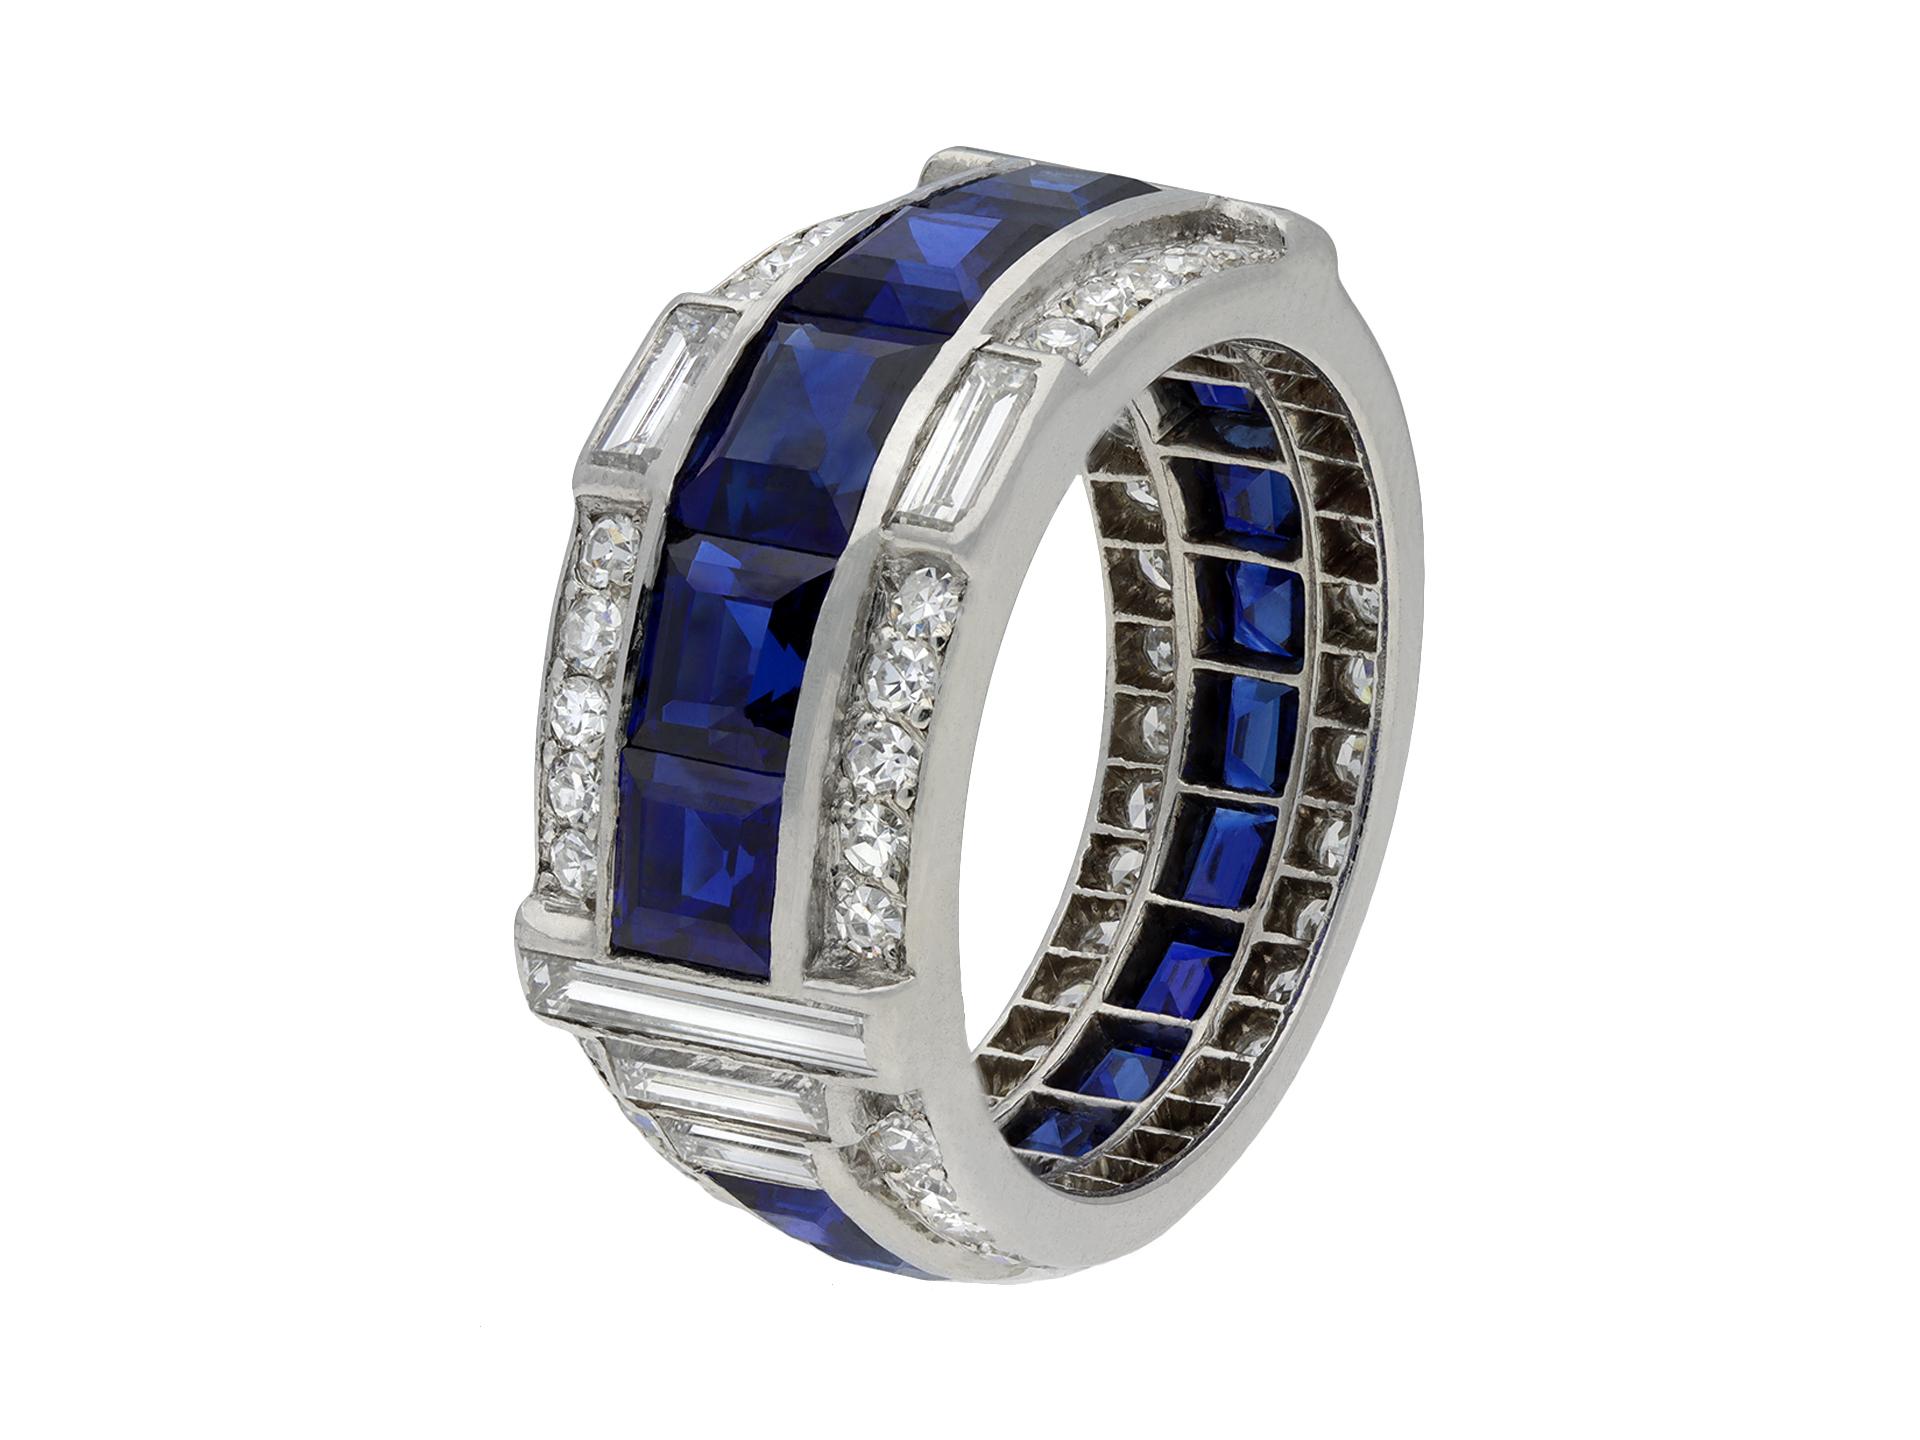 Art Deco sapphire and diamond ring. Set with sixteen calibre cut natural unenhanced sapphires, graduating in size, in open back channel settings with an approximate combined weight of 4.50 carats, further set with sixty-six round eight cut diamonds